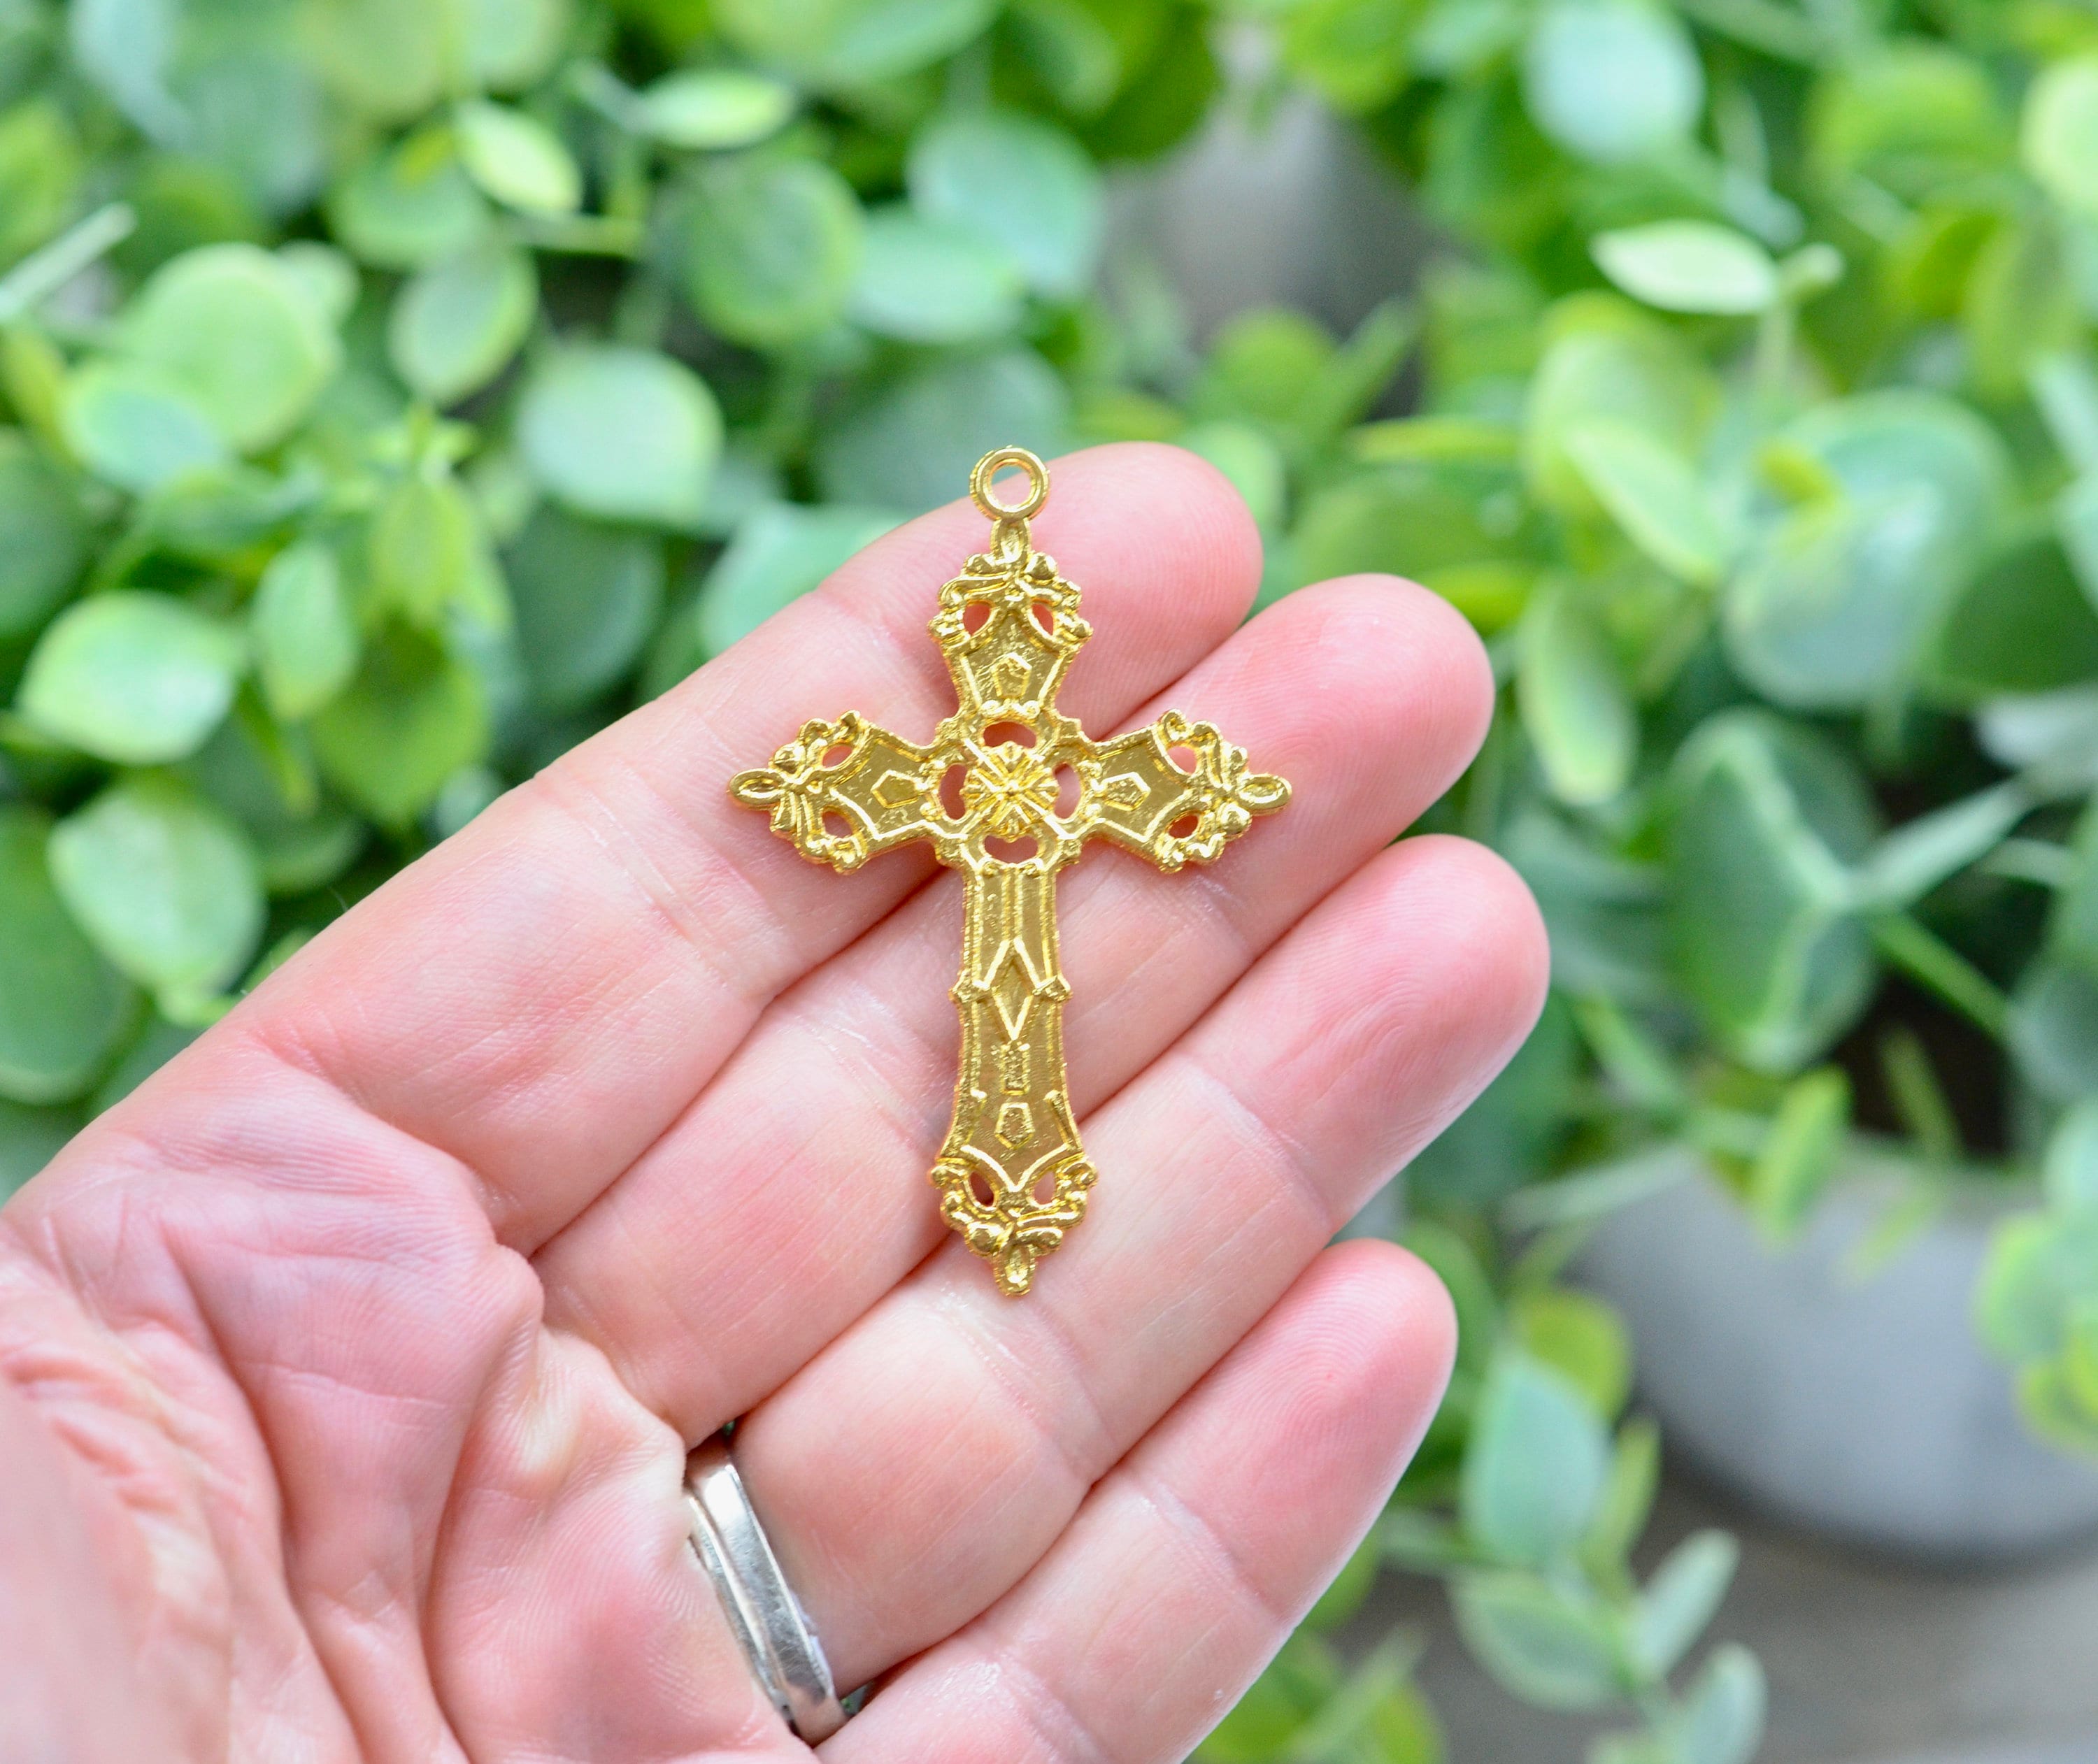 Cross Pendant 24 K Solid Fine Yellow Gold Filled Charms Lines Necklace  Christian Jewelry Factory God Gift1839 From Jfunq, $17.37